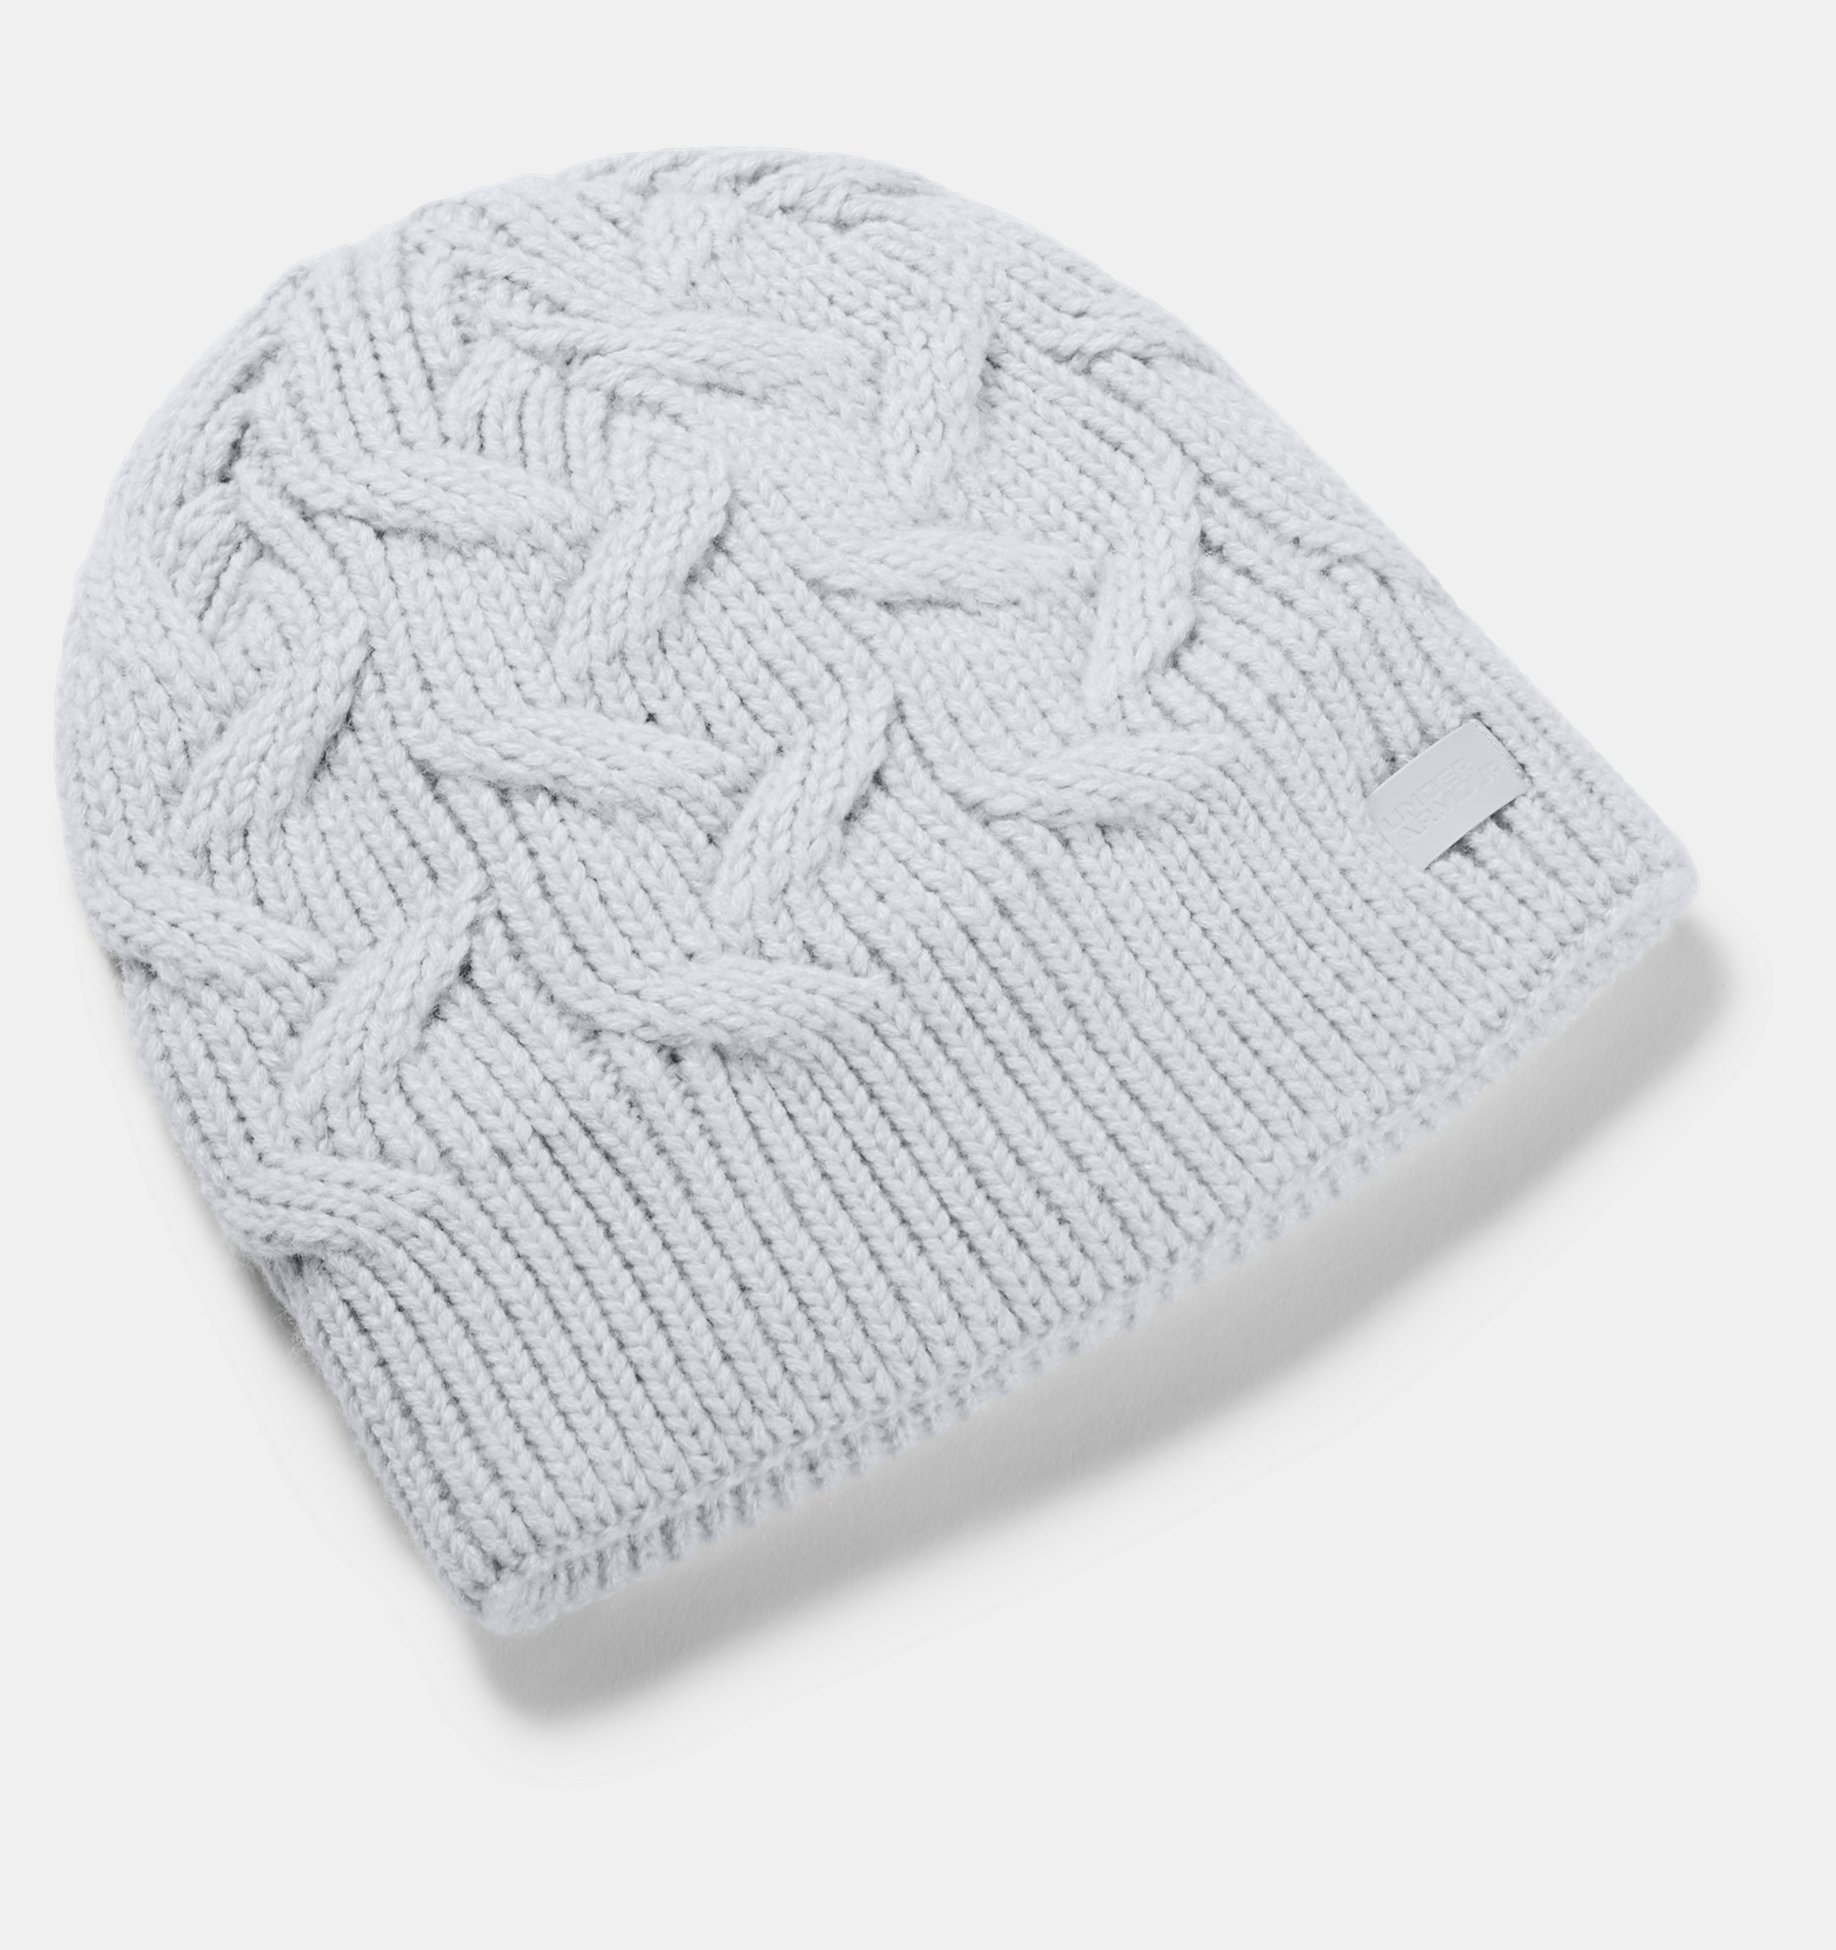 NO1 GIFTS Bad Hair Day Beanie Hats and More Beanie Hats 